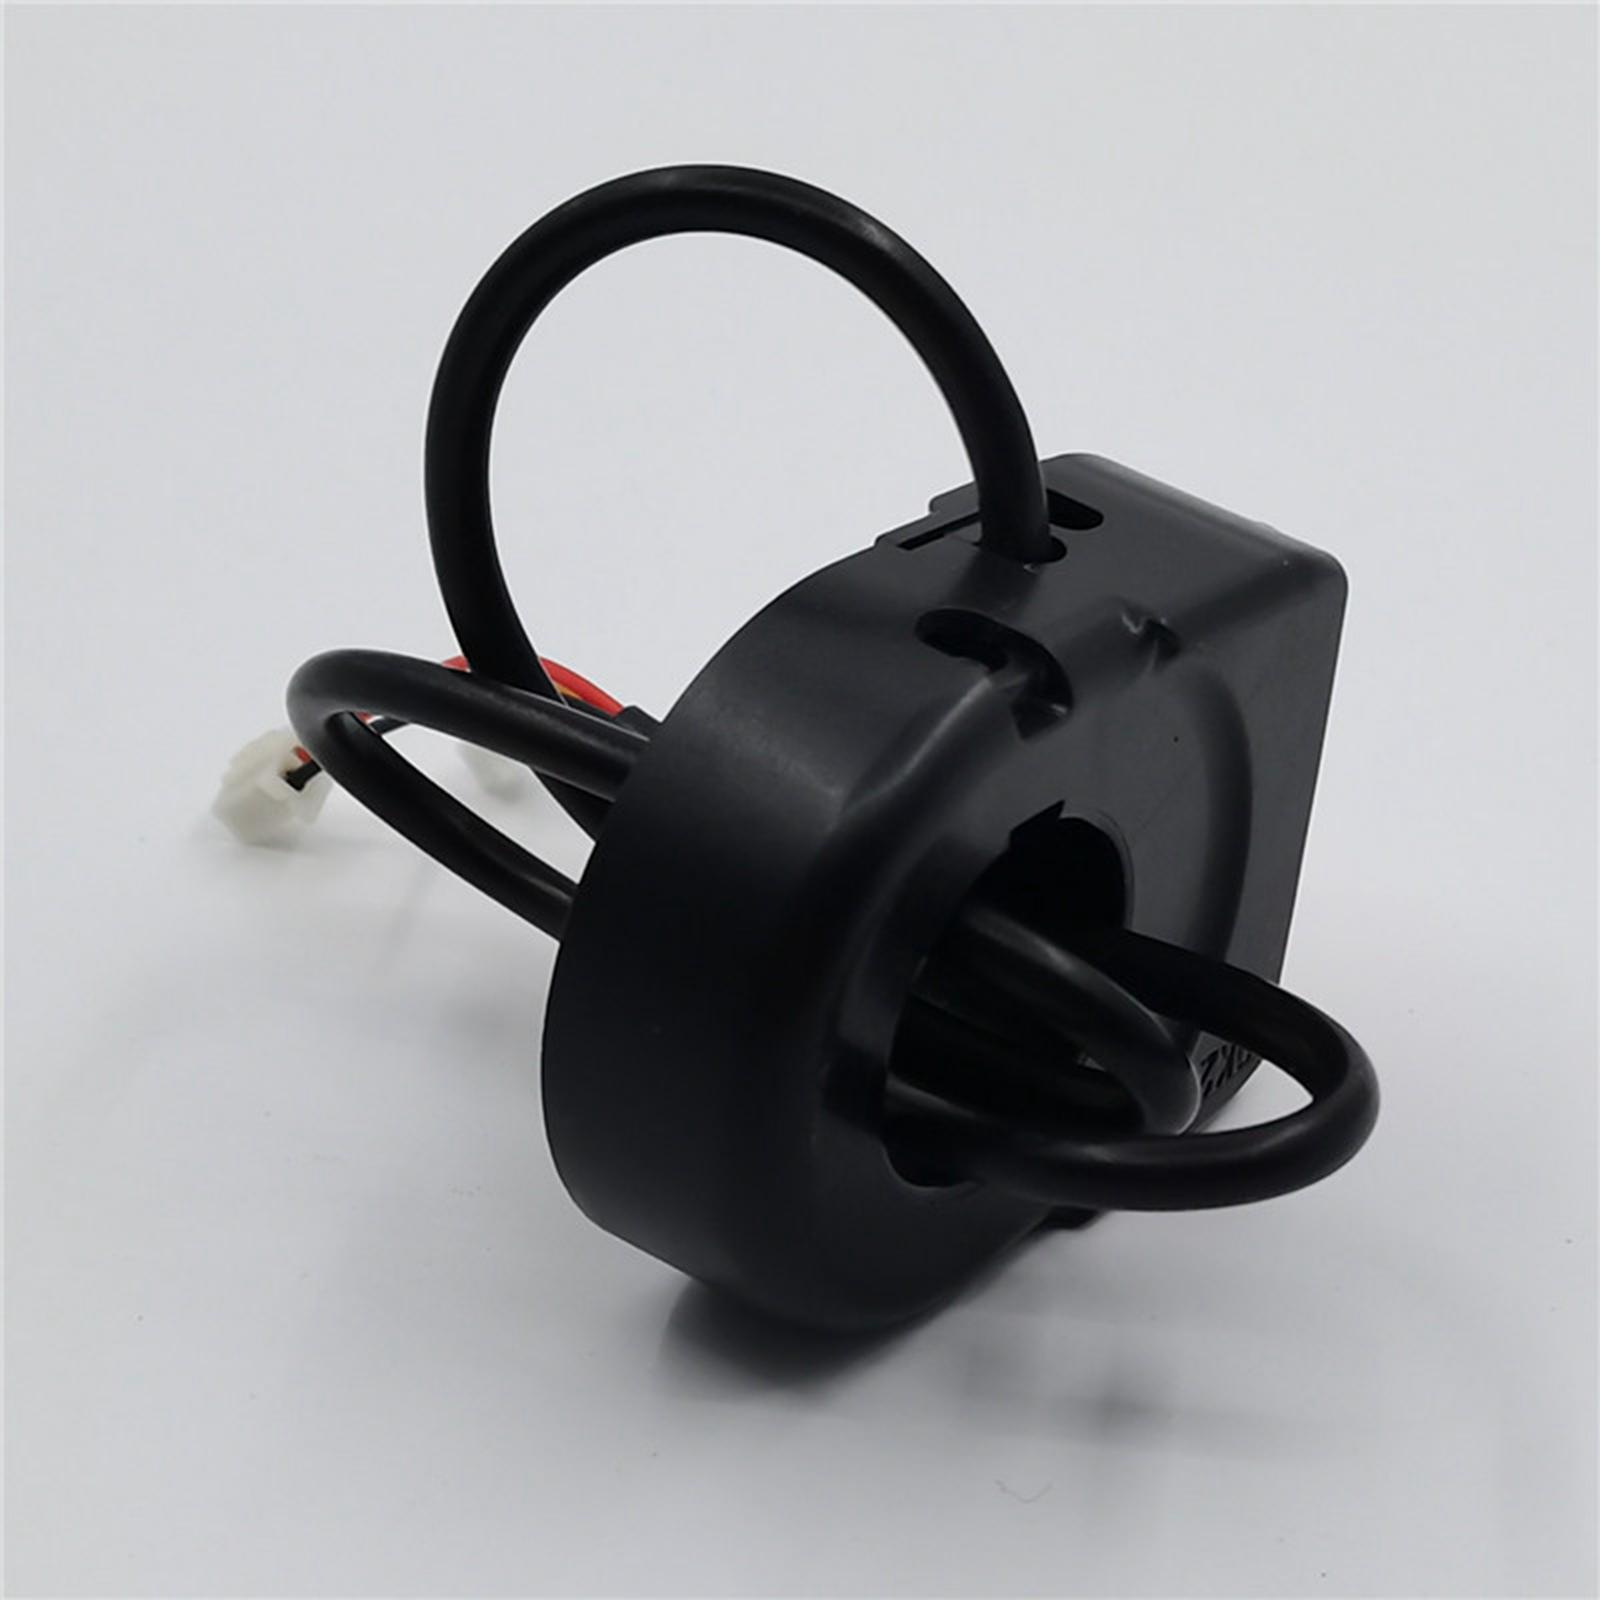 Handlebar Switch Motorbike Easy Installation Wide Applications Accessories 15.75 inch Long Cable Spare Parts Handlebar  Headlight Switch